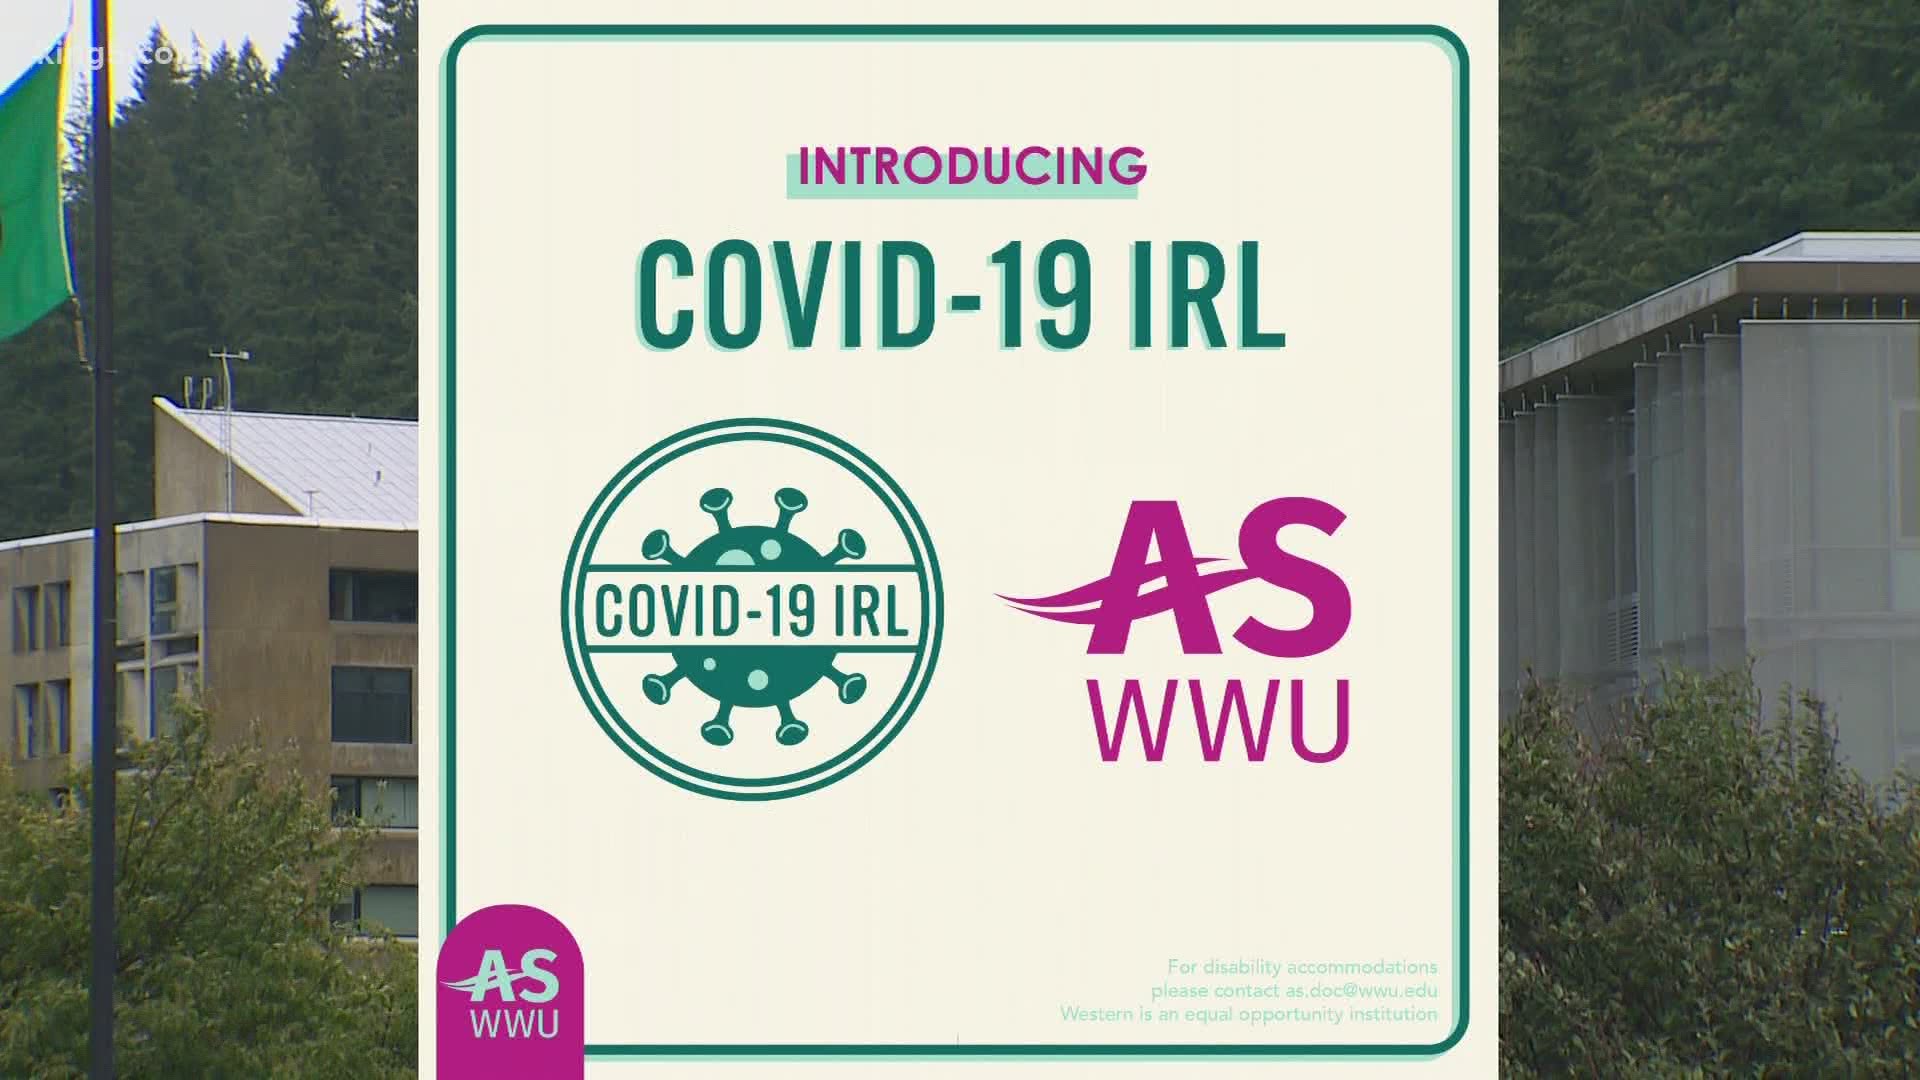 'COVID-19 IRL' (In Real Life) is a social media campaign started by Western Washington University students for students to help them learn about the coronavirus.